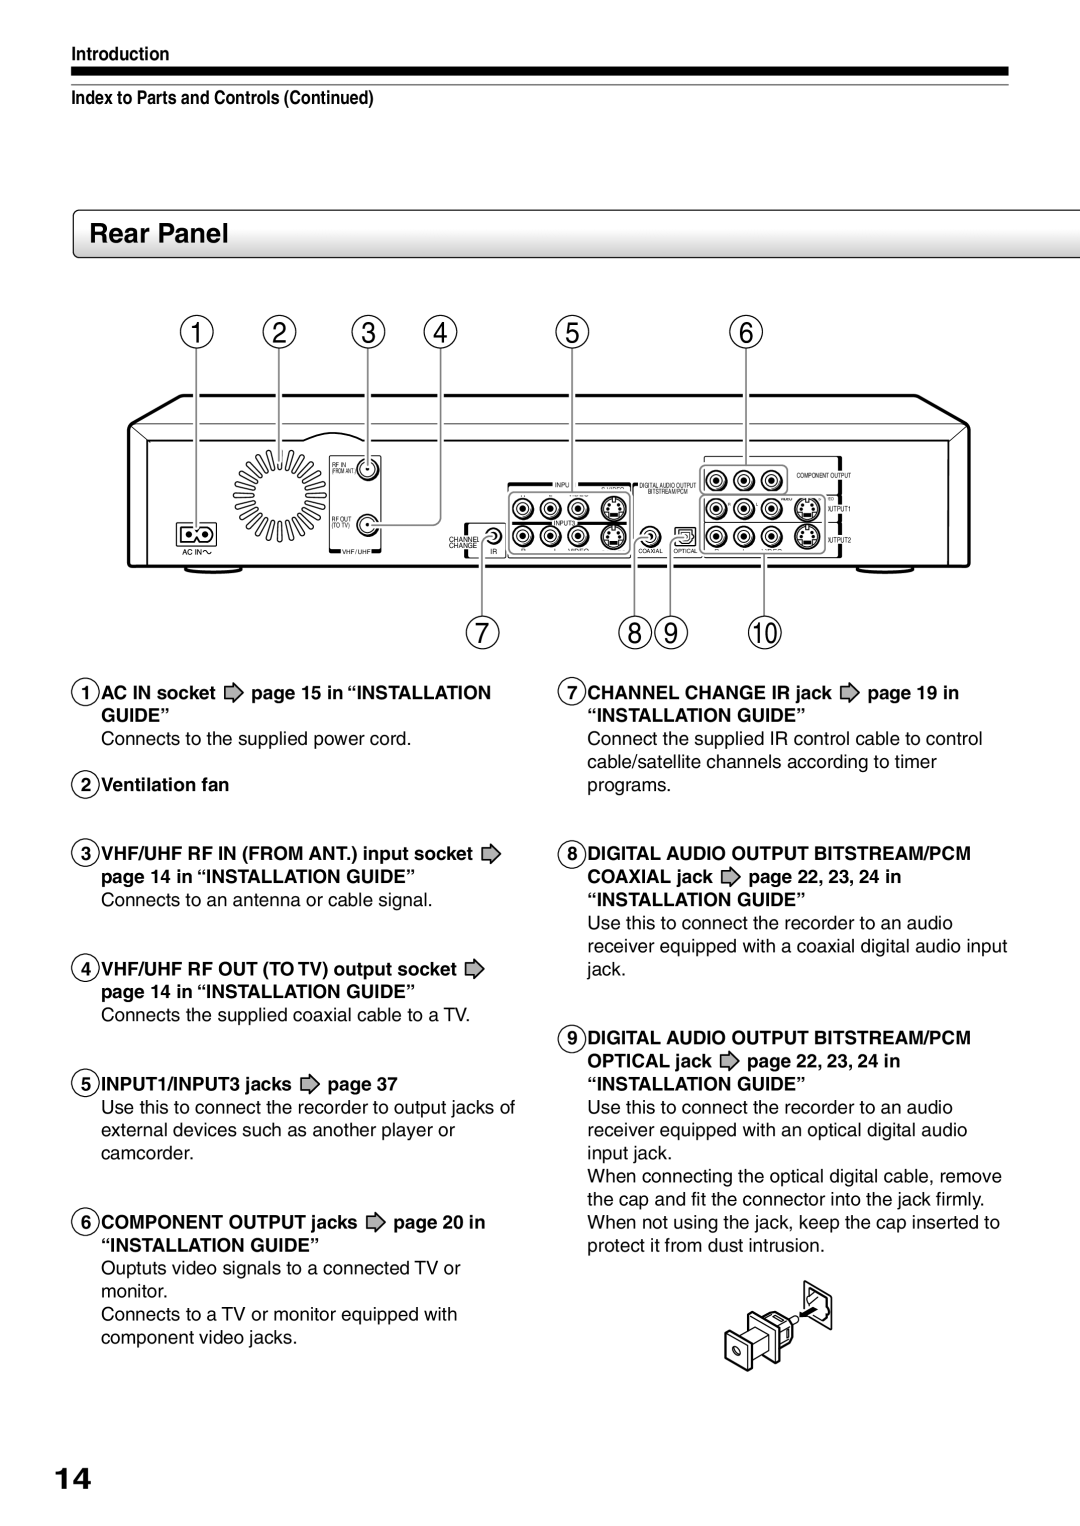 Toshiba RD-XS32SC Rear Panel, Index to Parts and Controls Continued, 1AC IN socket page 15 in “INSTALLATION GUIDE” 